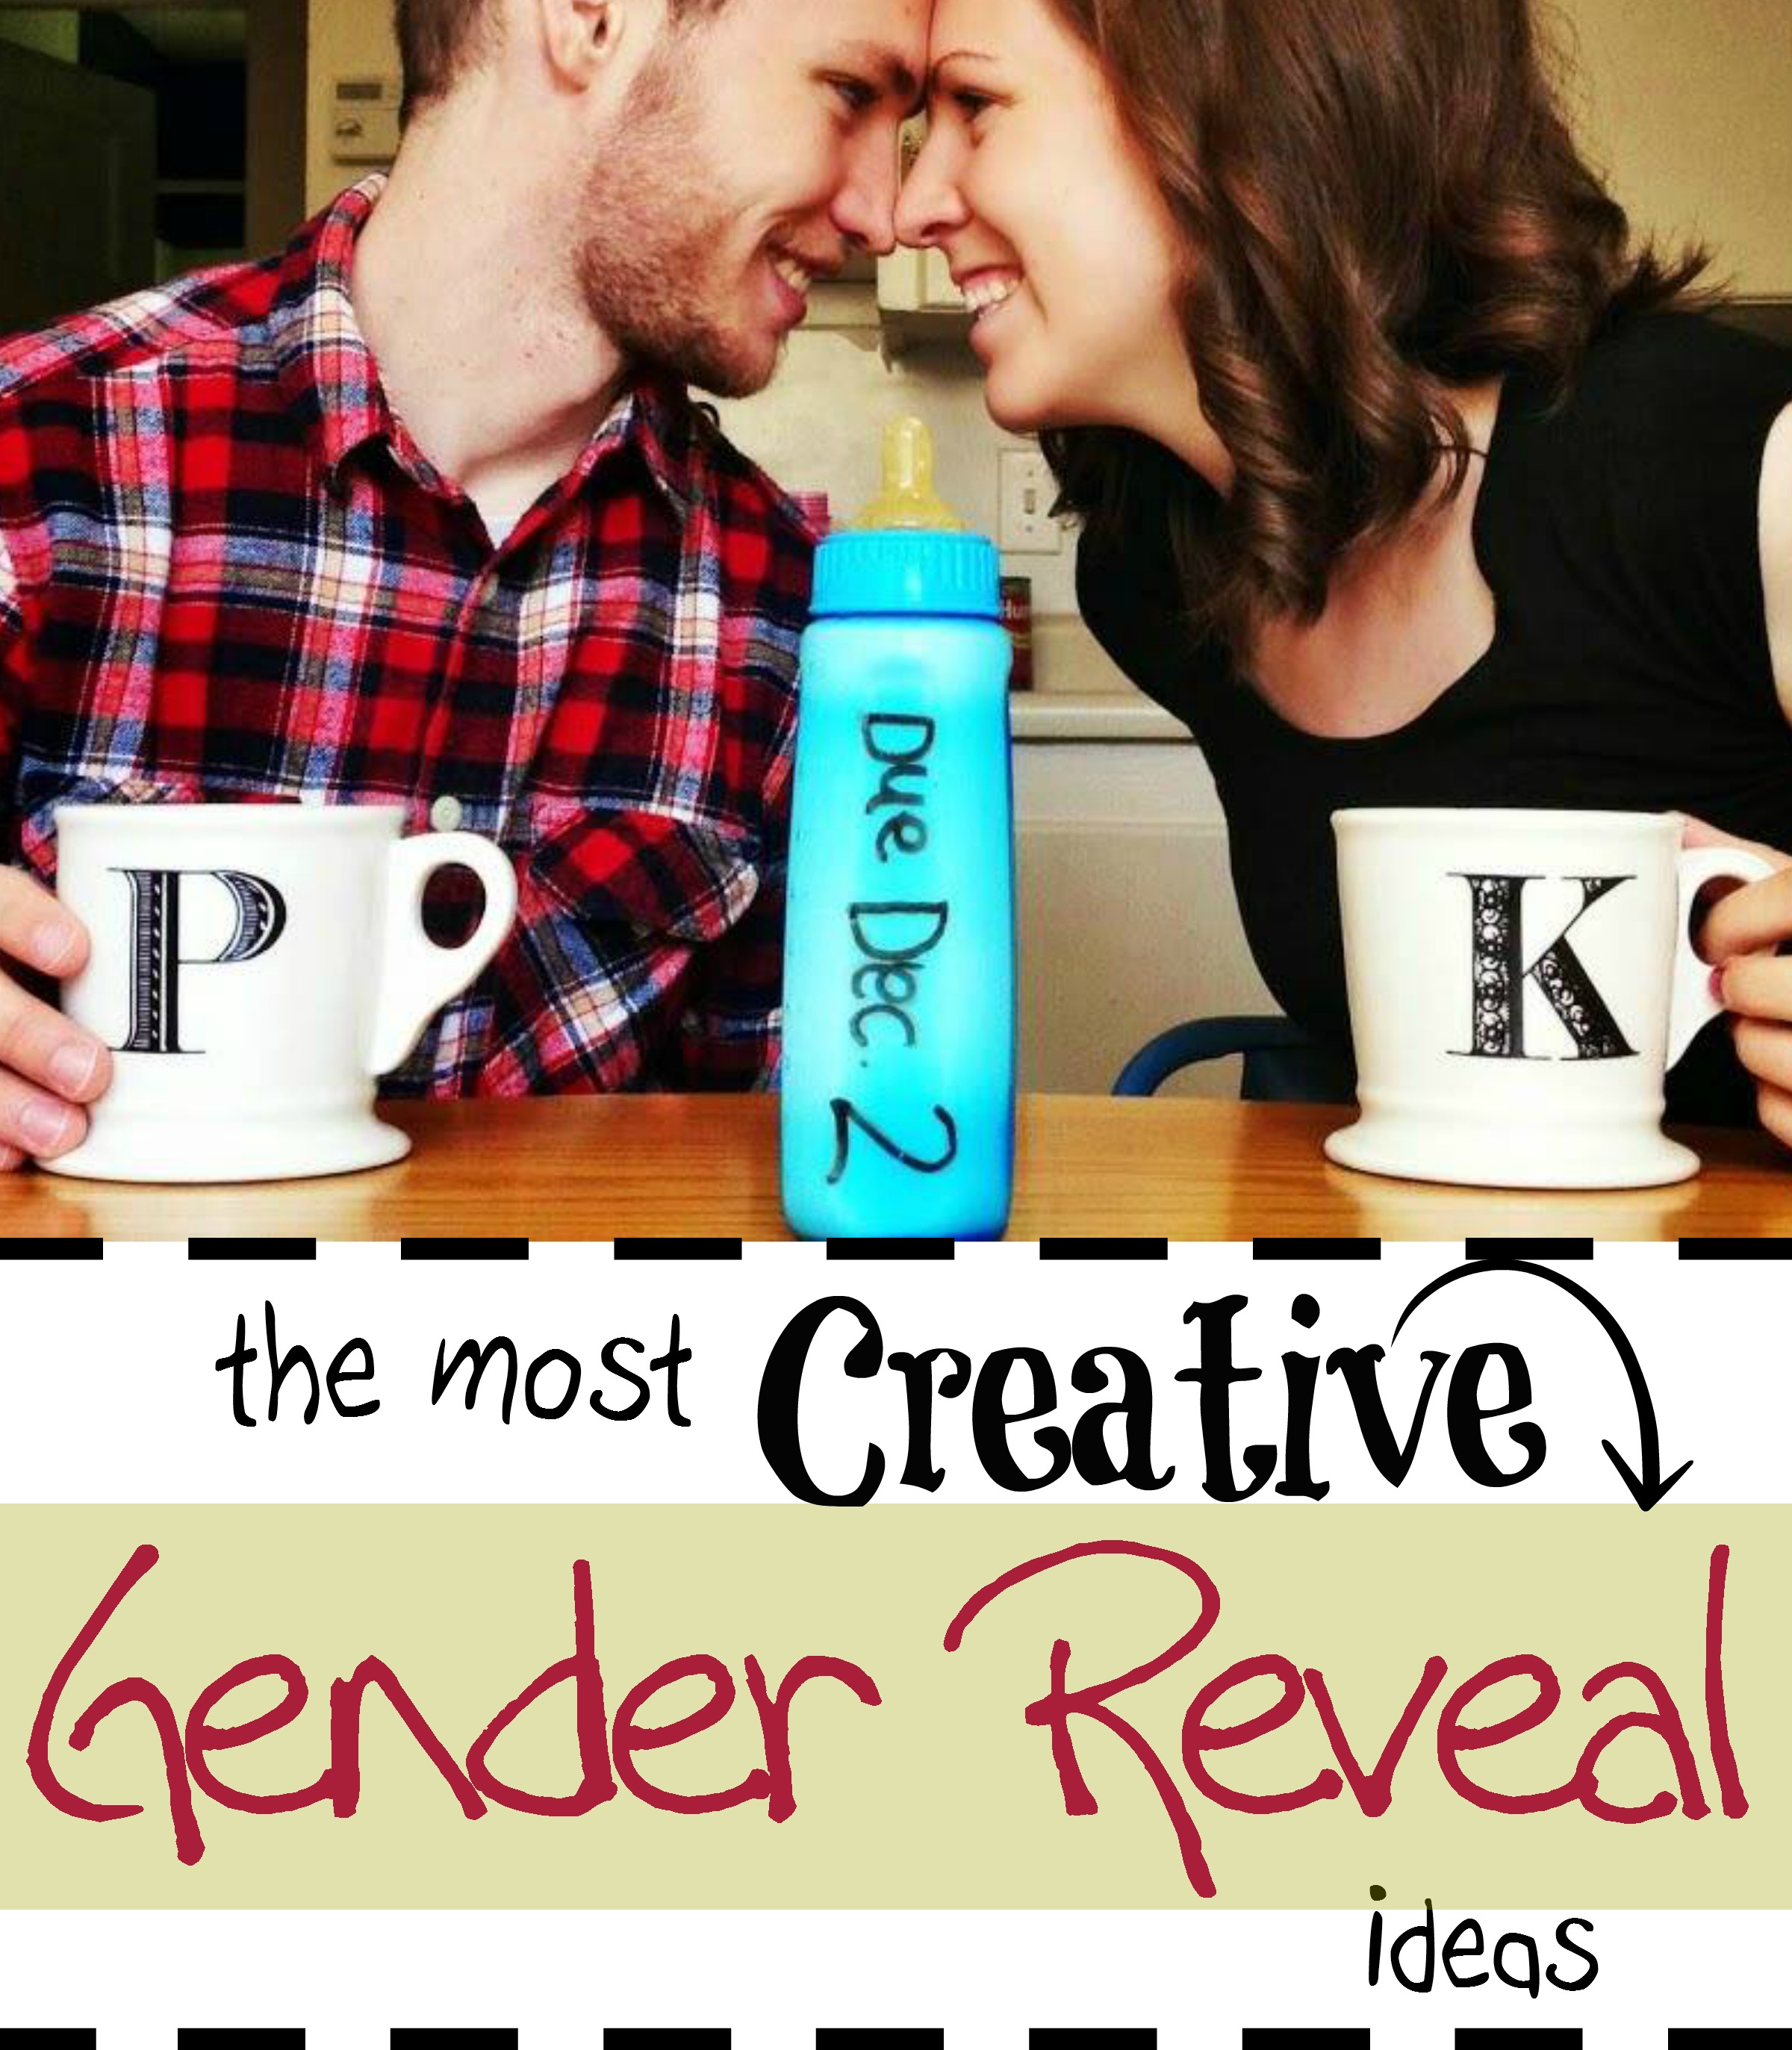 the-most-creative-gender-reveal-ideas